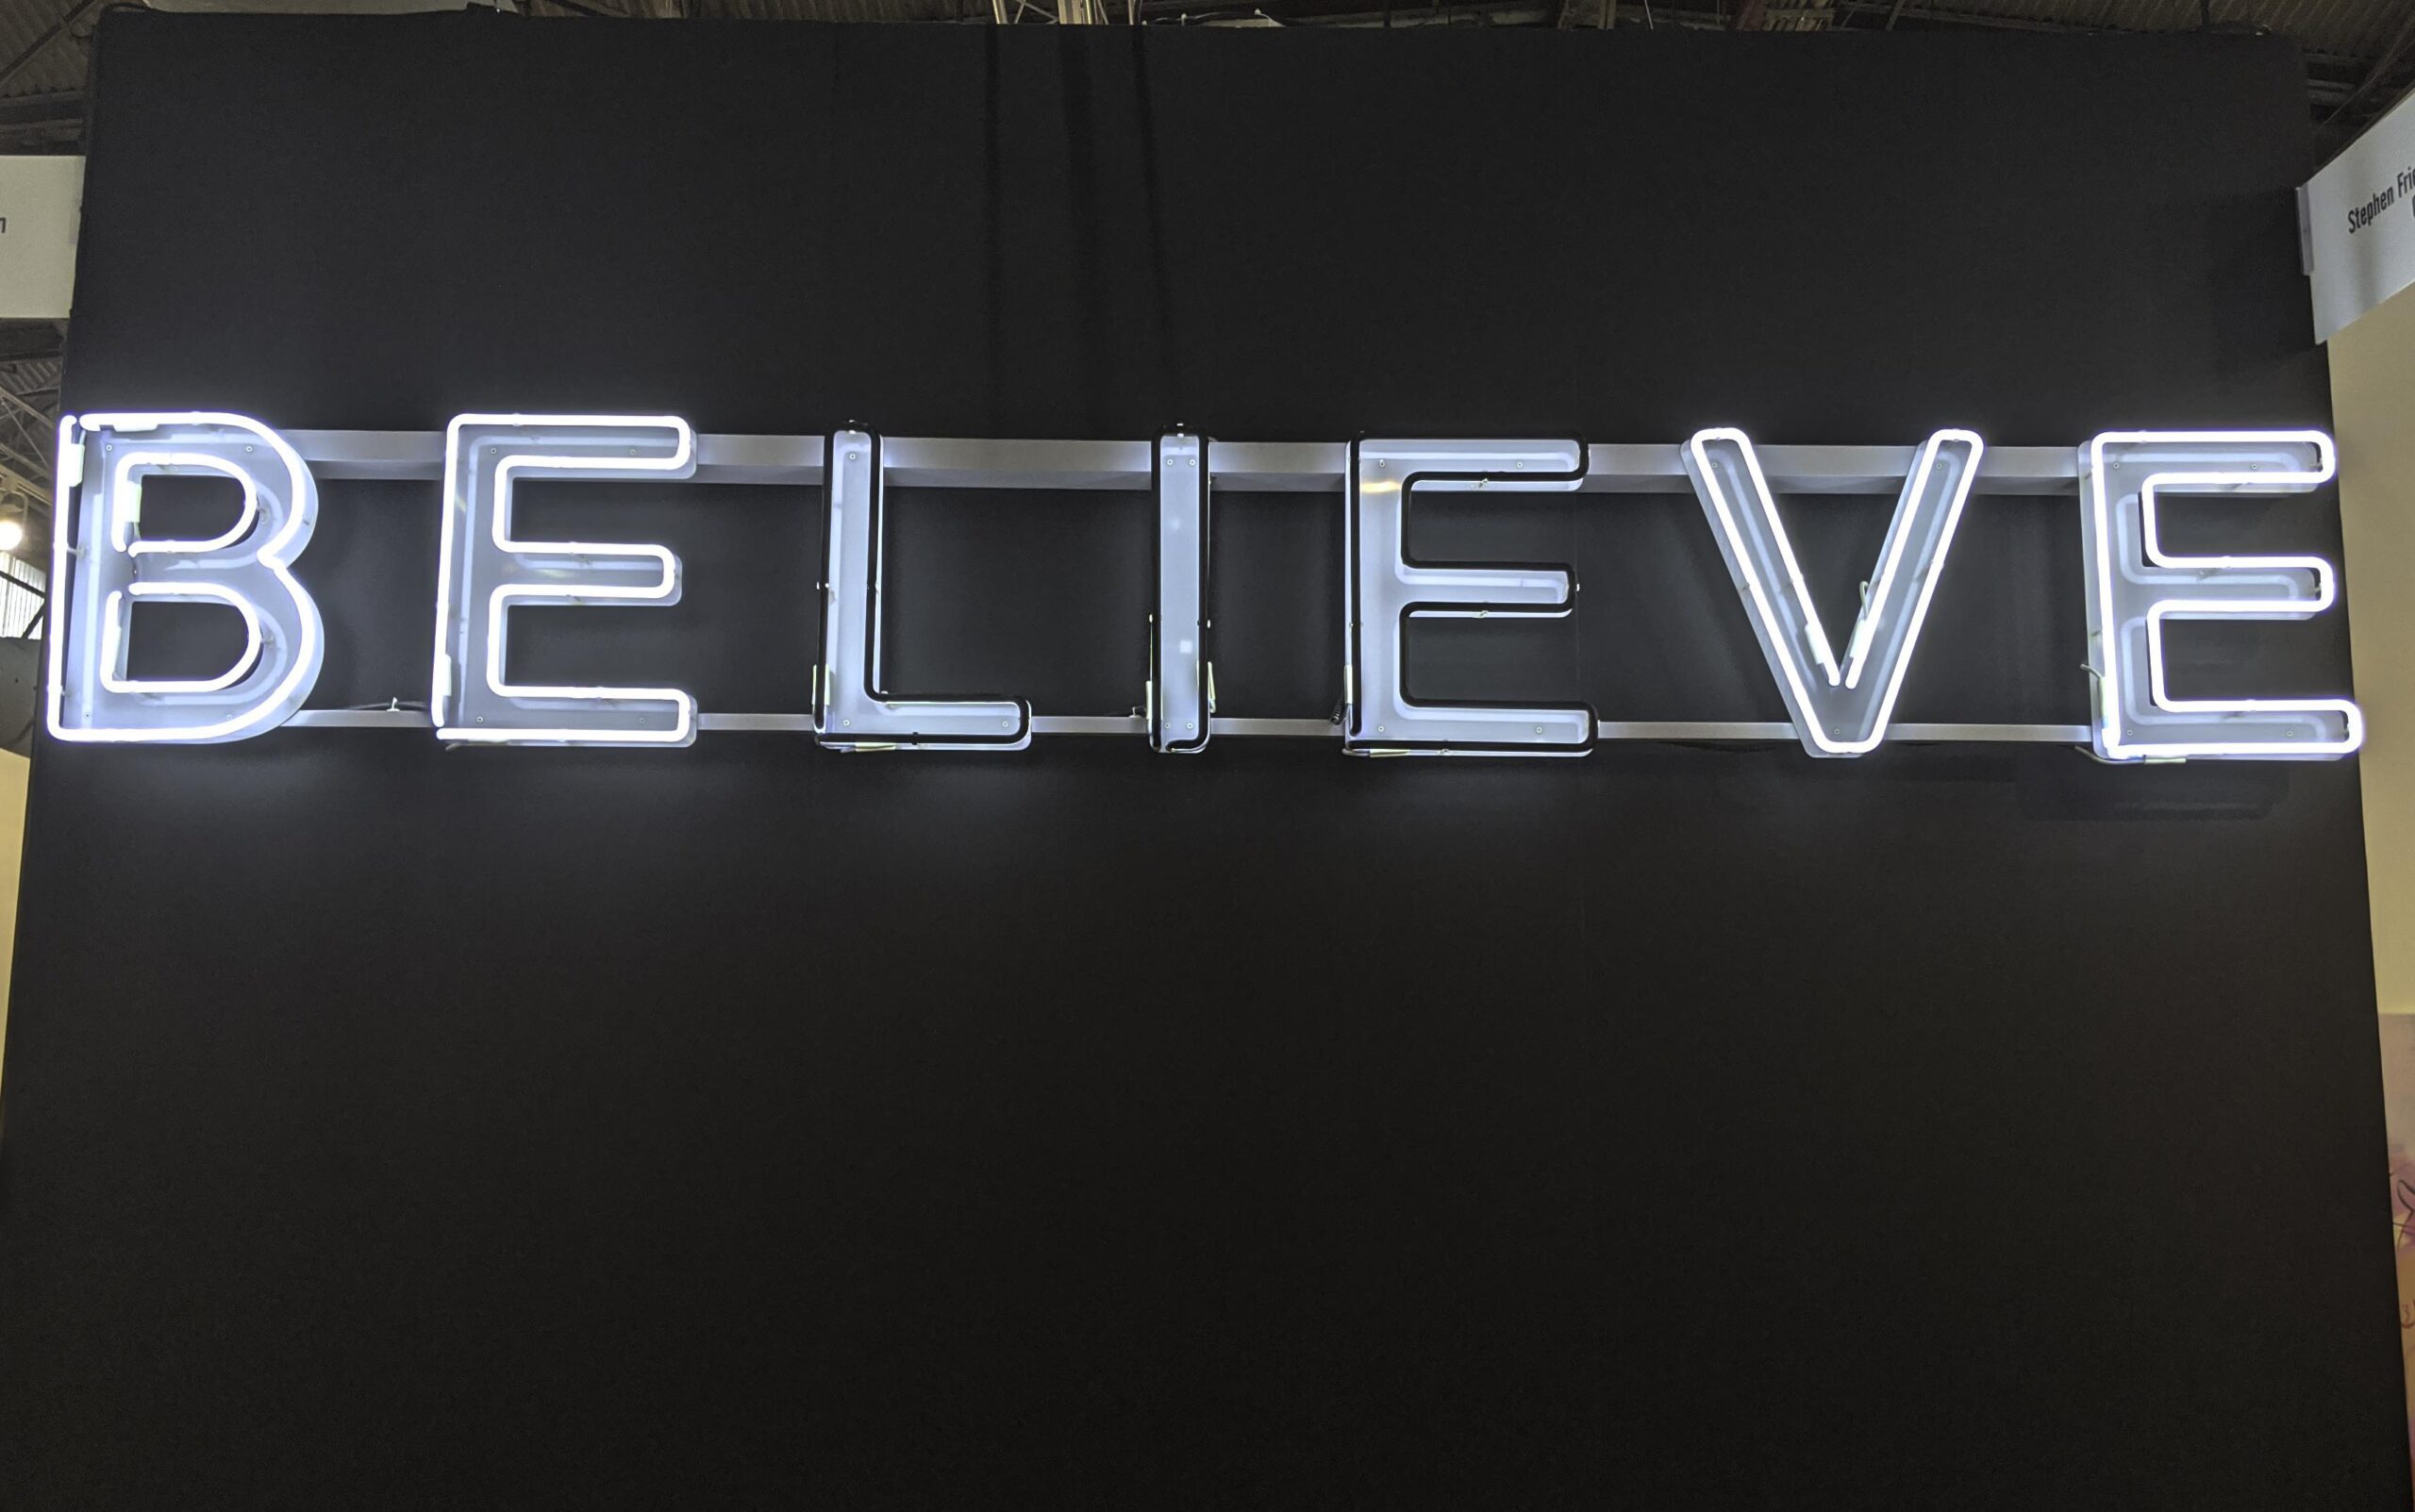 Navigating Cameo Misuse: A New Challenge in Online Reputation, "Believe" on Wall, Recover Reputation